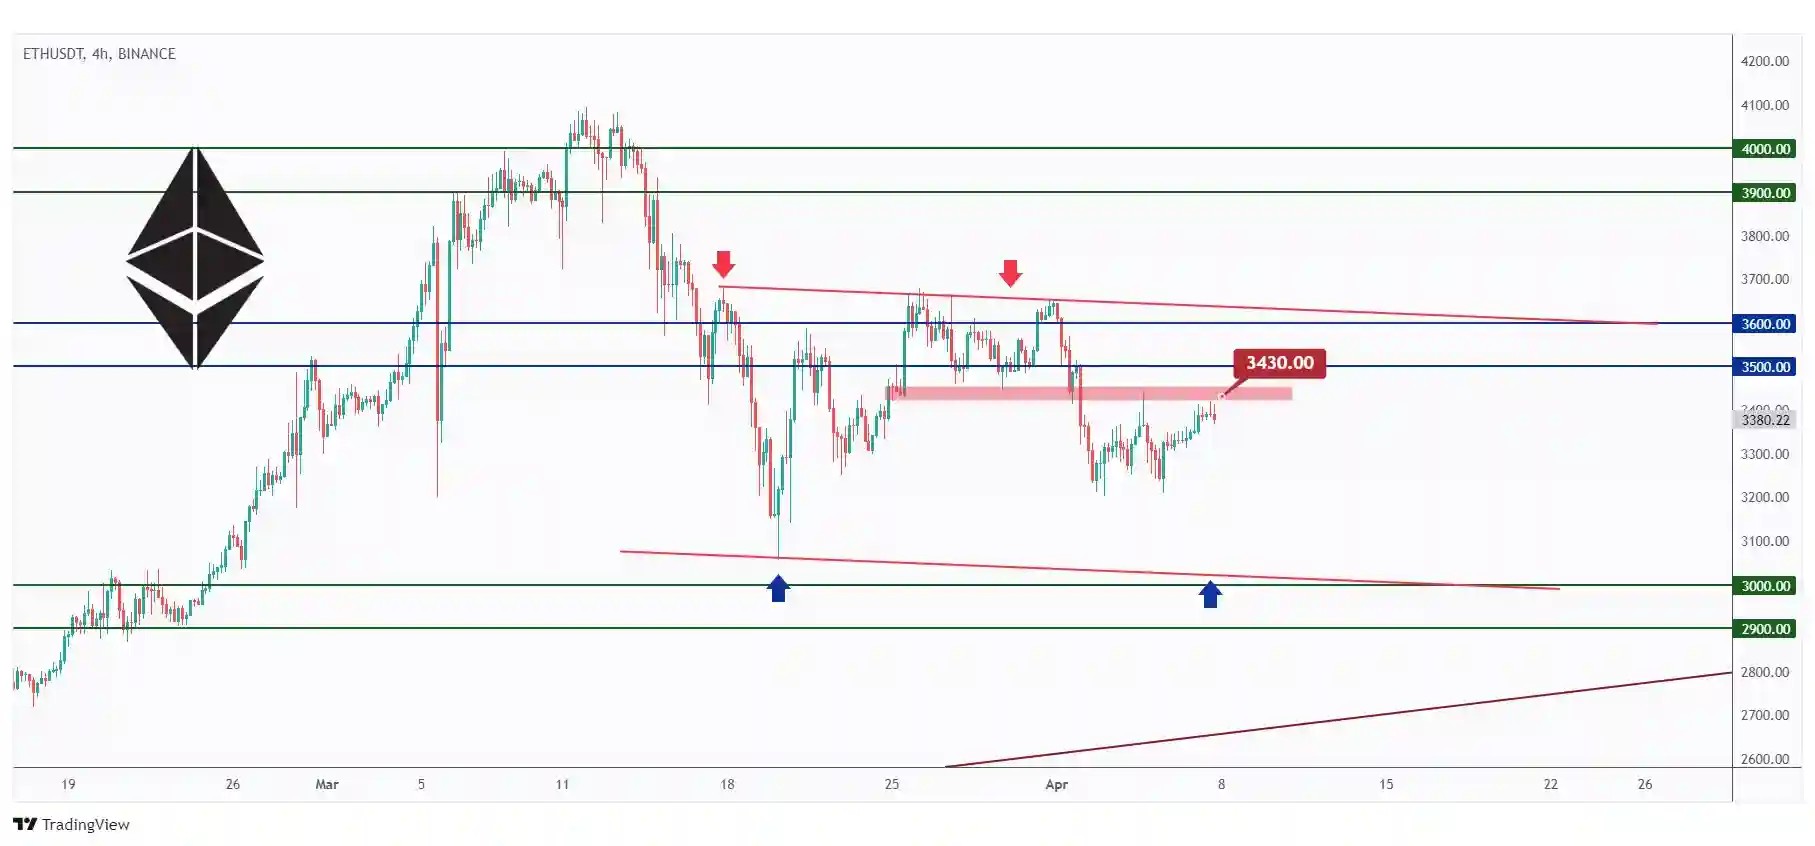 ETH 4H chart overall bearish after breaking below the $3430 major low.